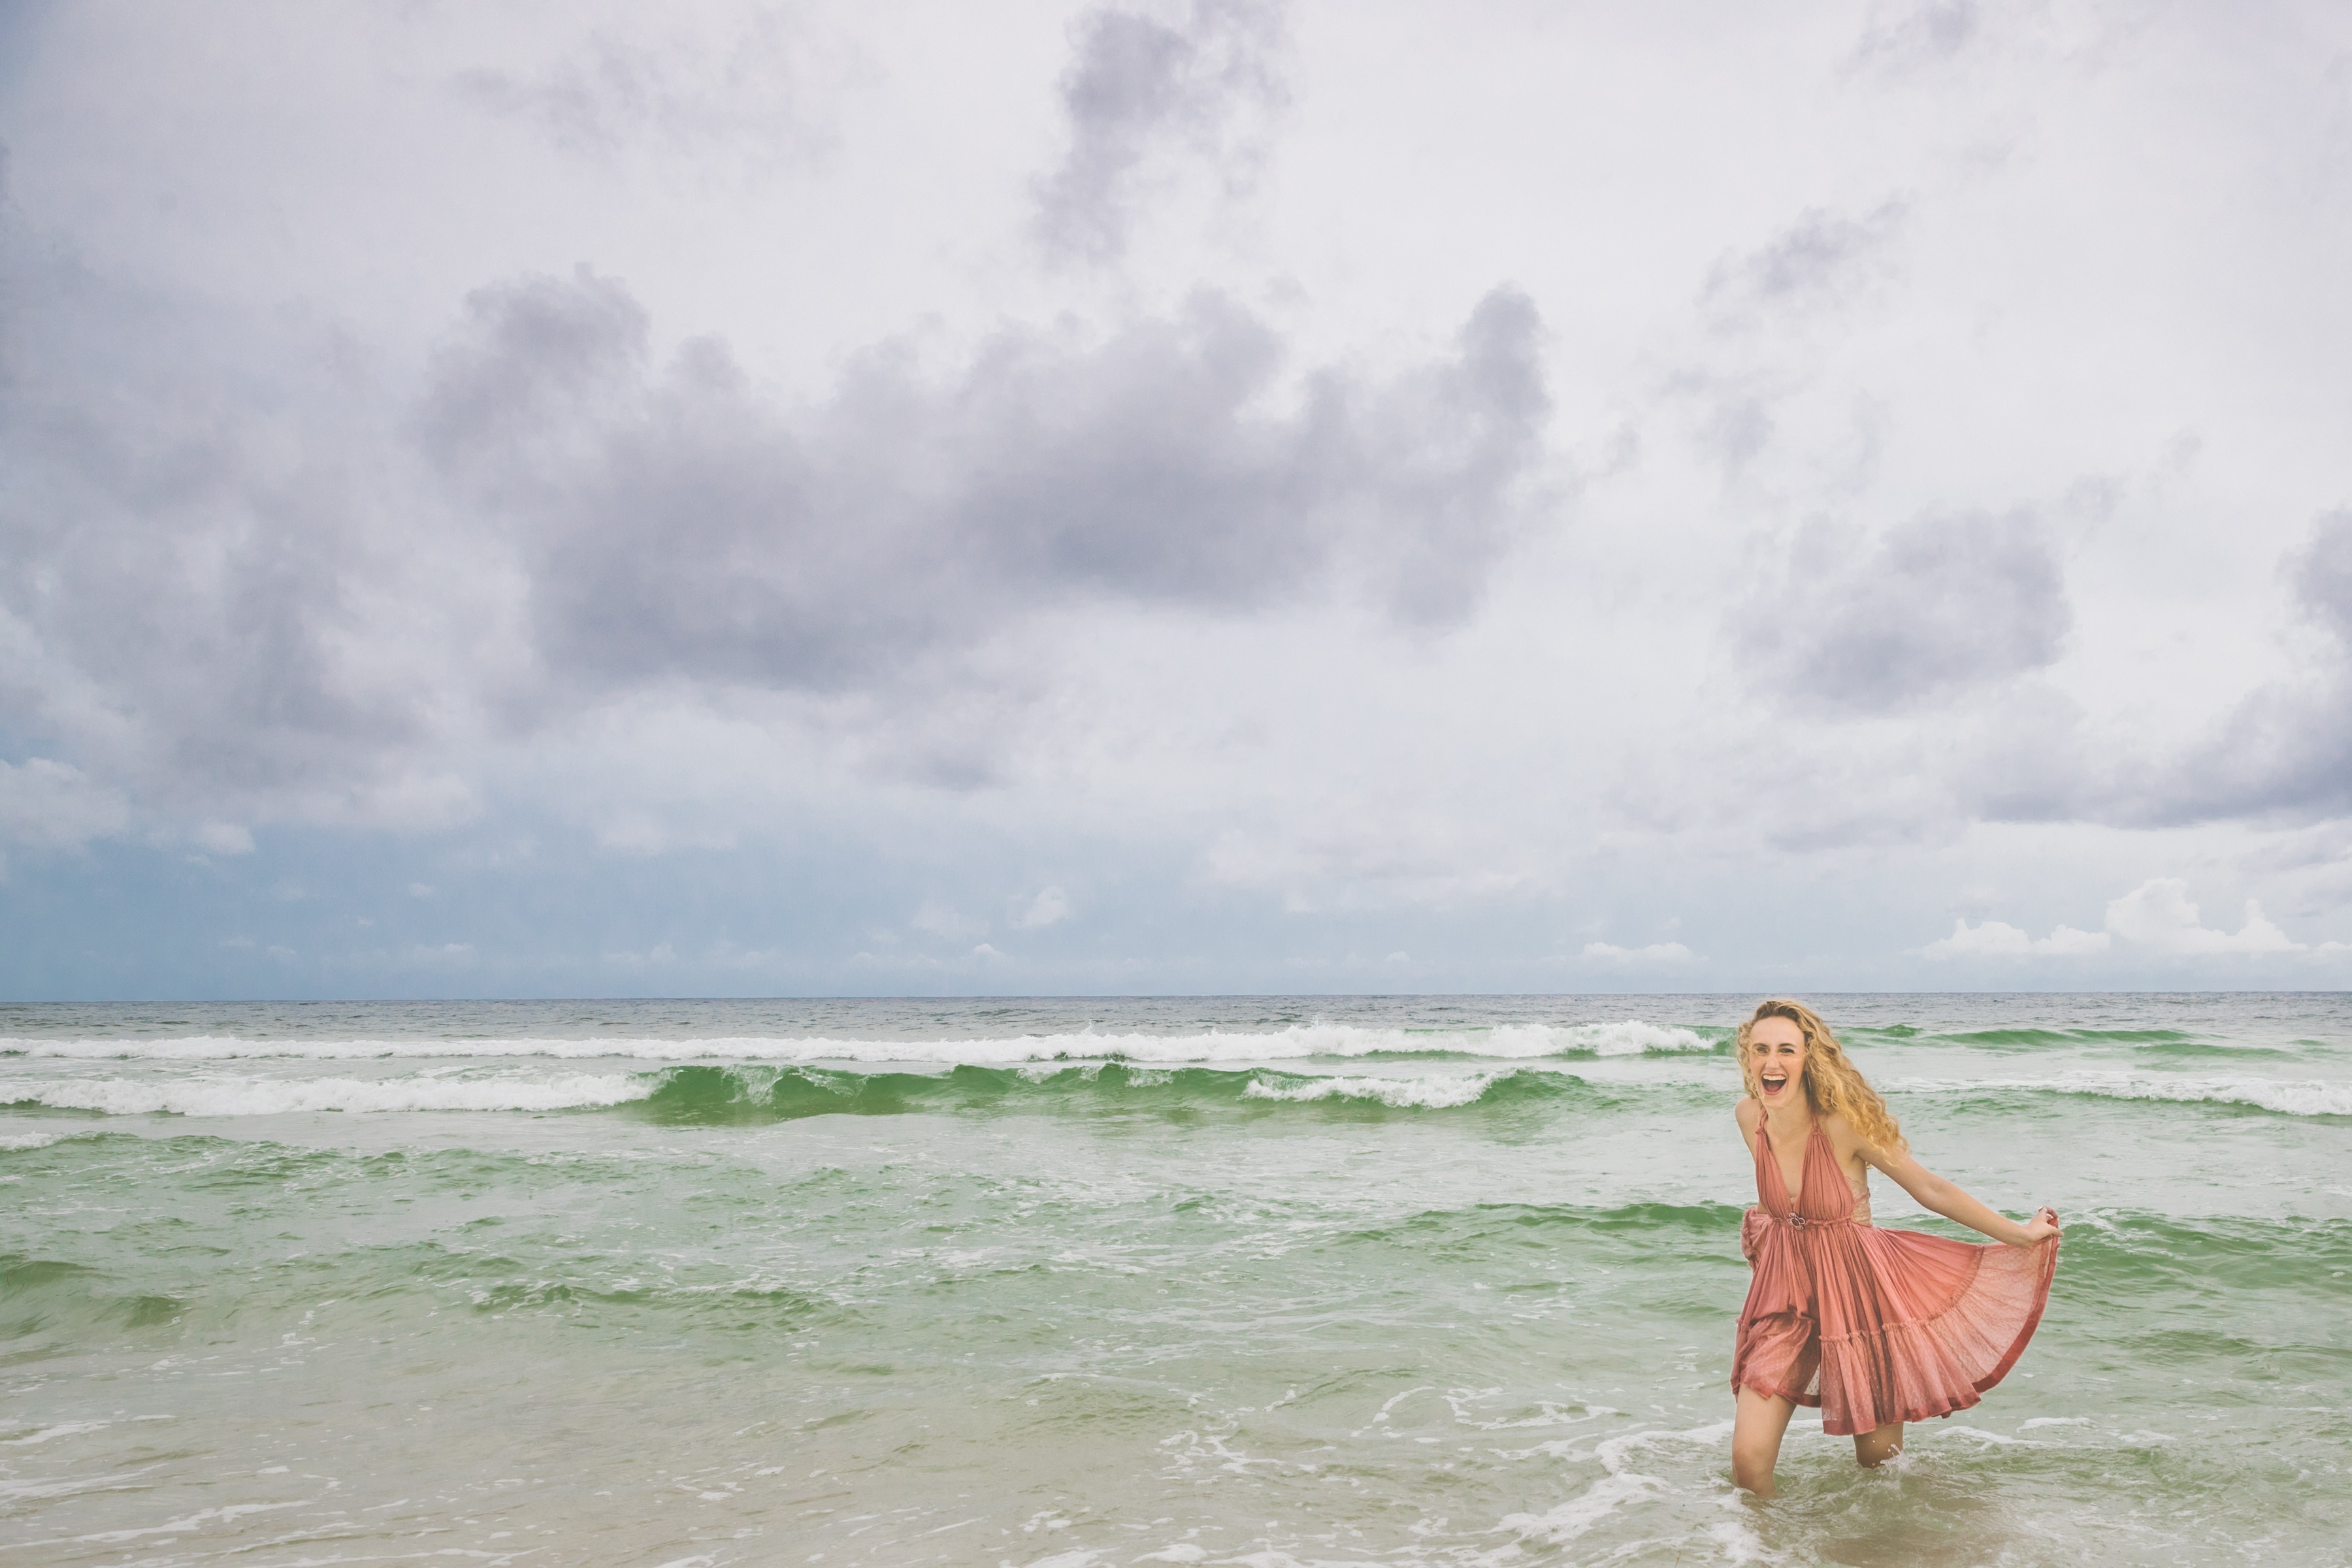 High school senior walking out into the emerald Gulf of Mexico with stormy skies